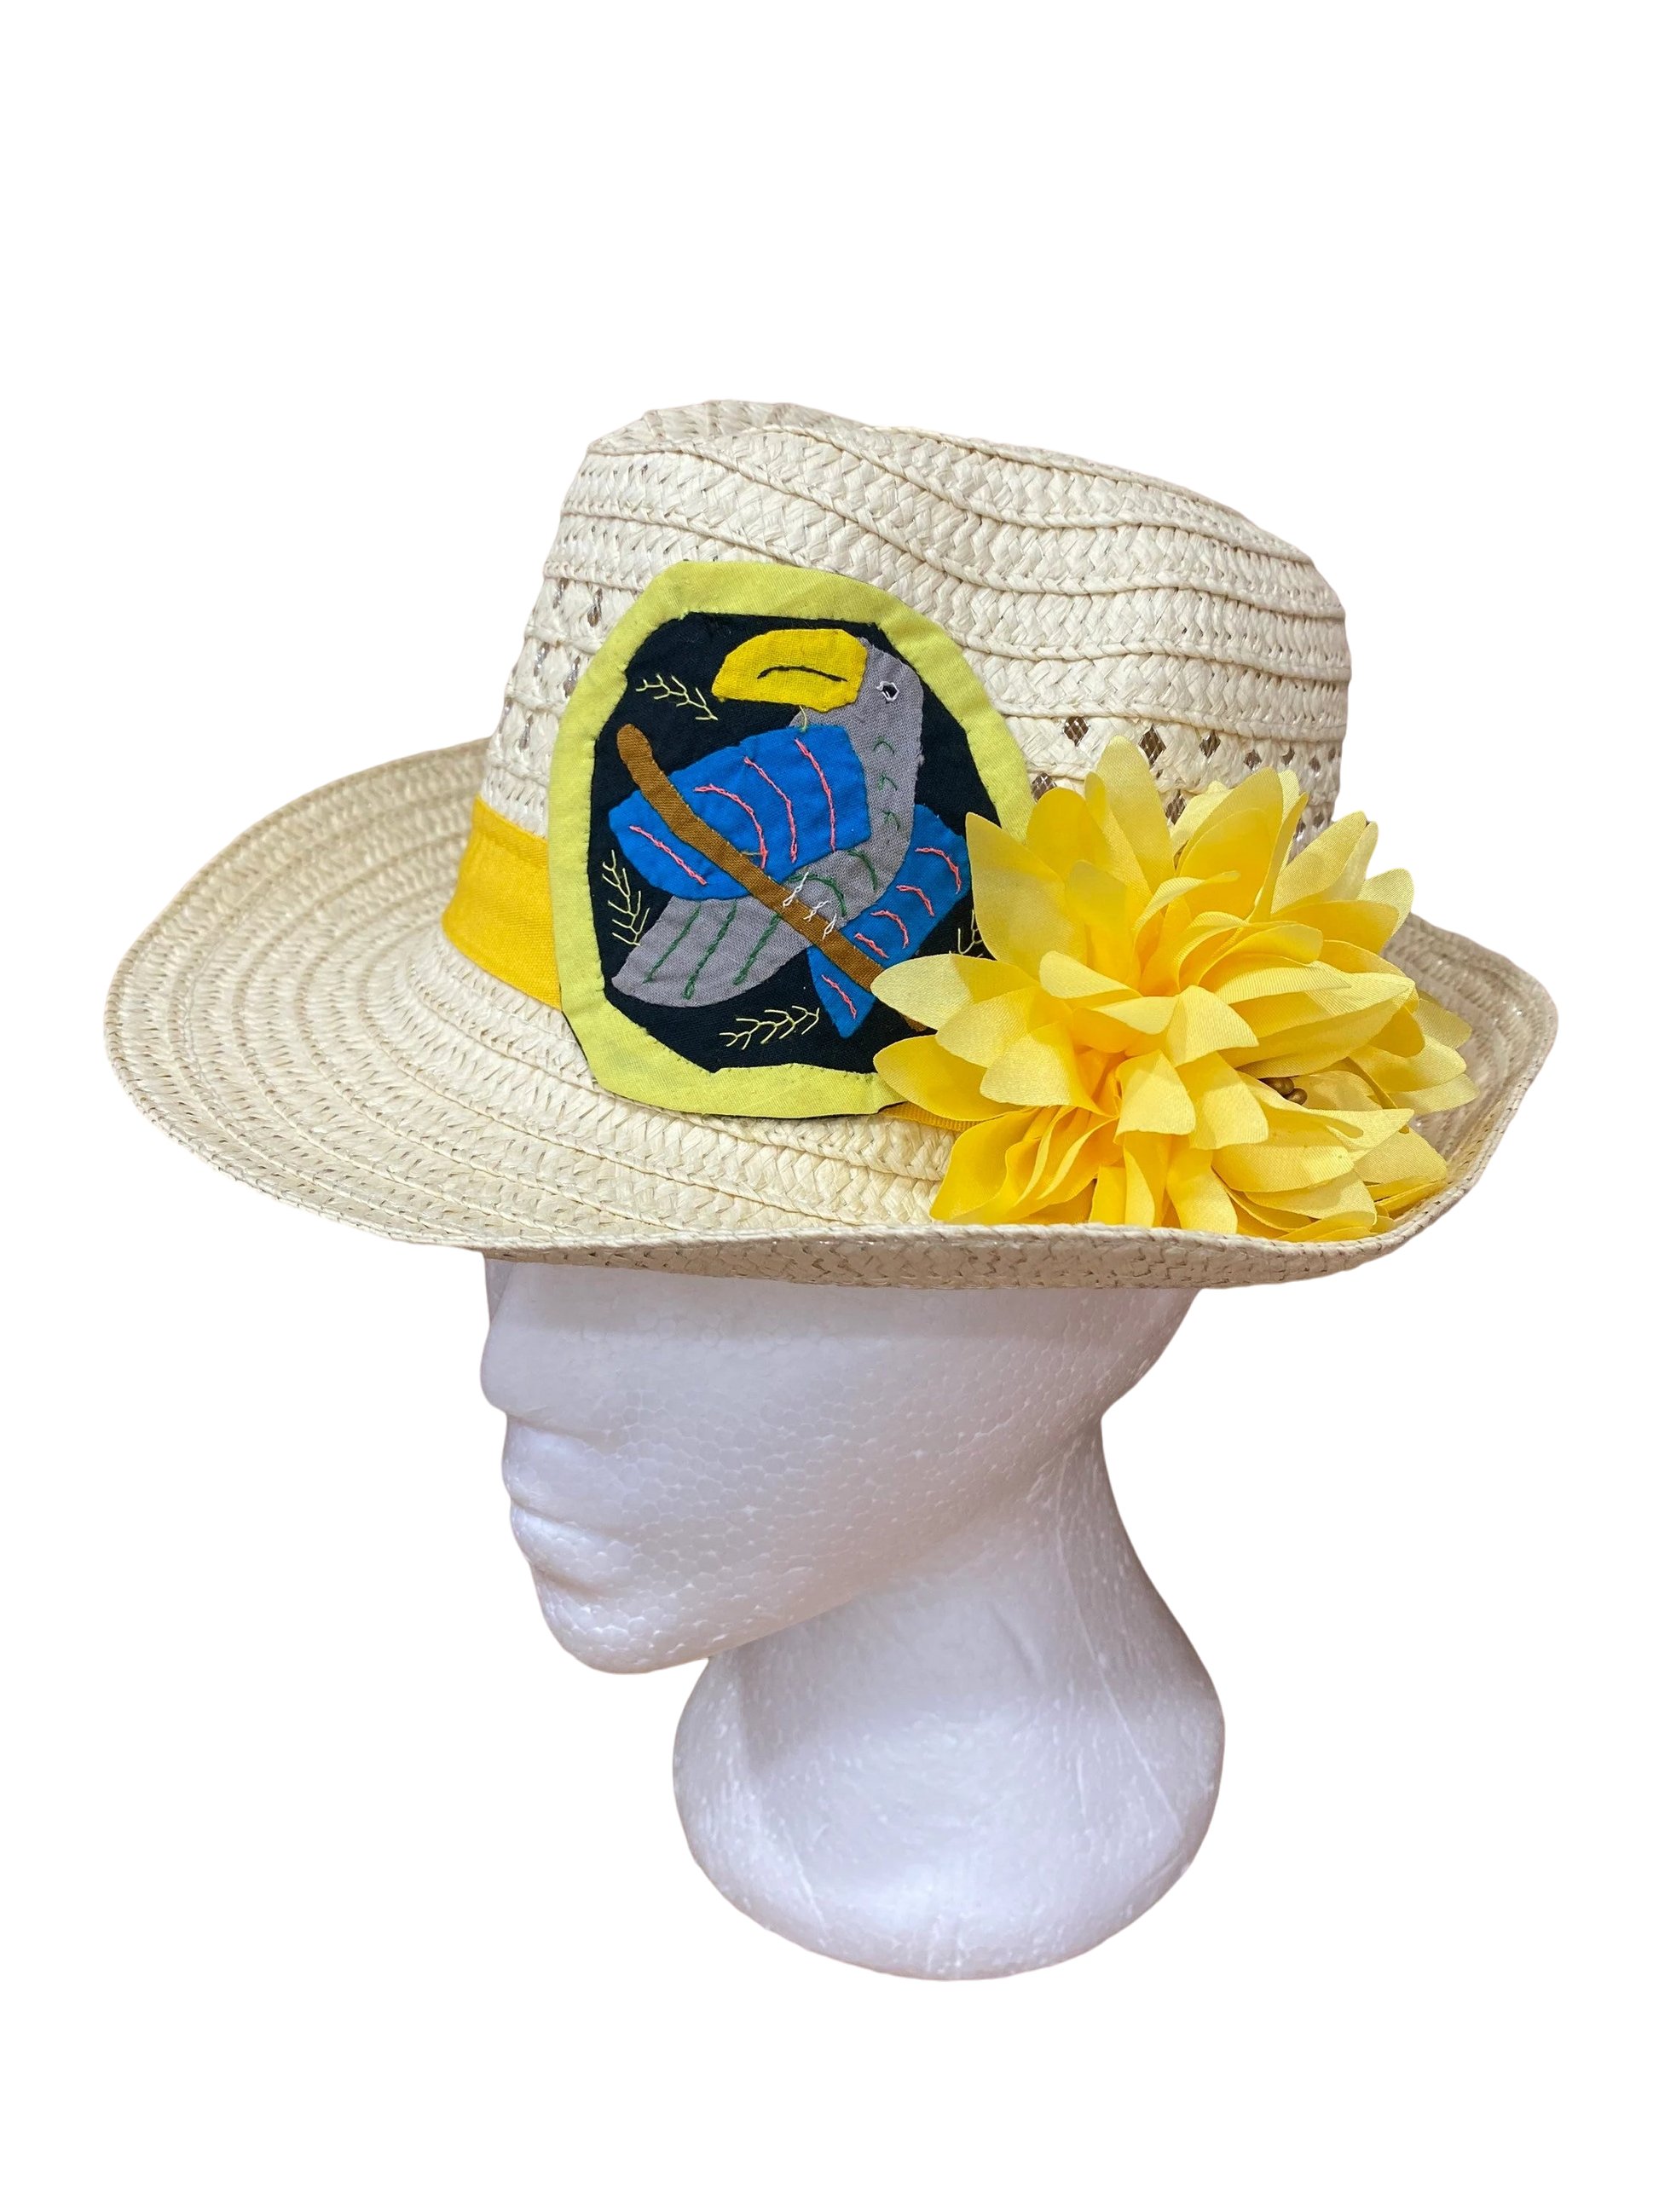 Mola Authentic Decorated Fedora Party Straw Hat Panama Hat Panamanian Summer Beach Yellow - Vivian Fong Designs